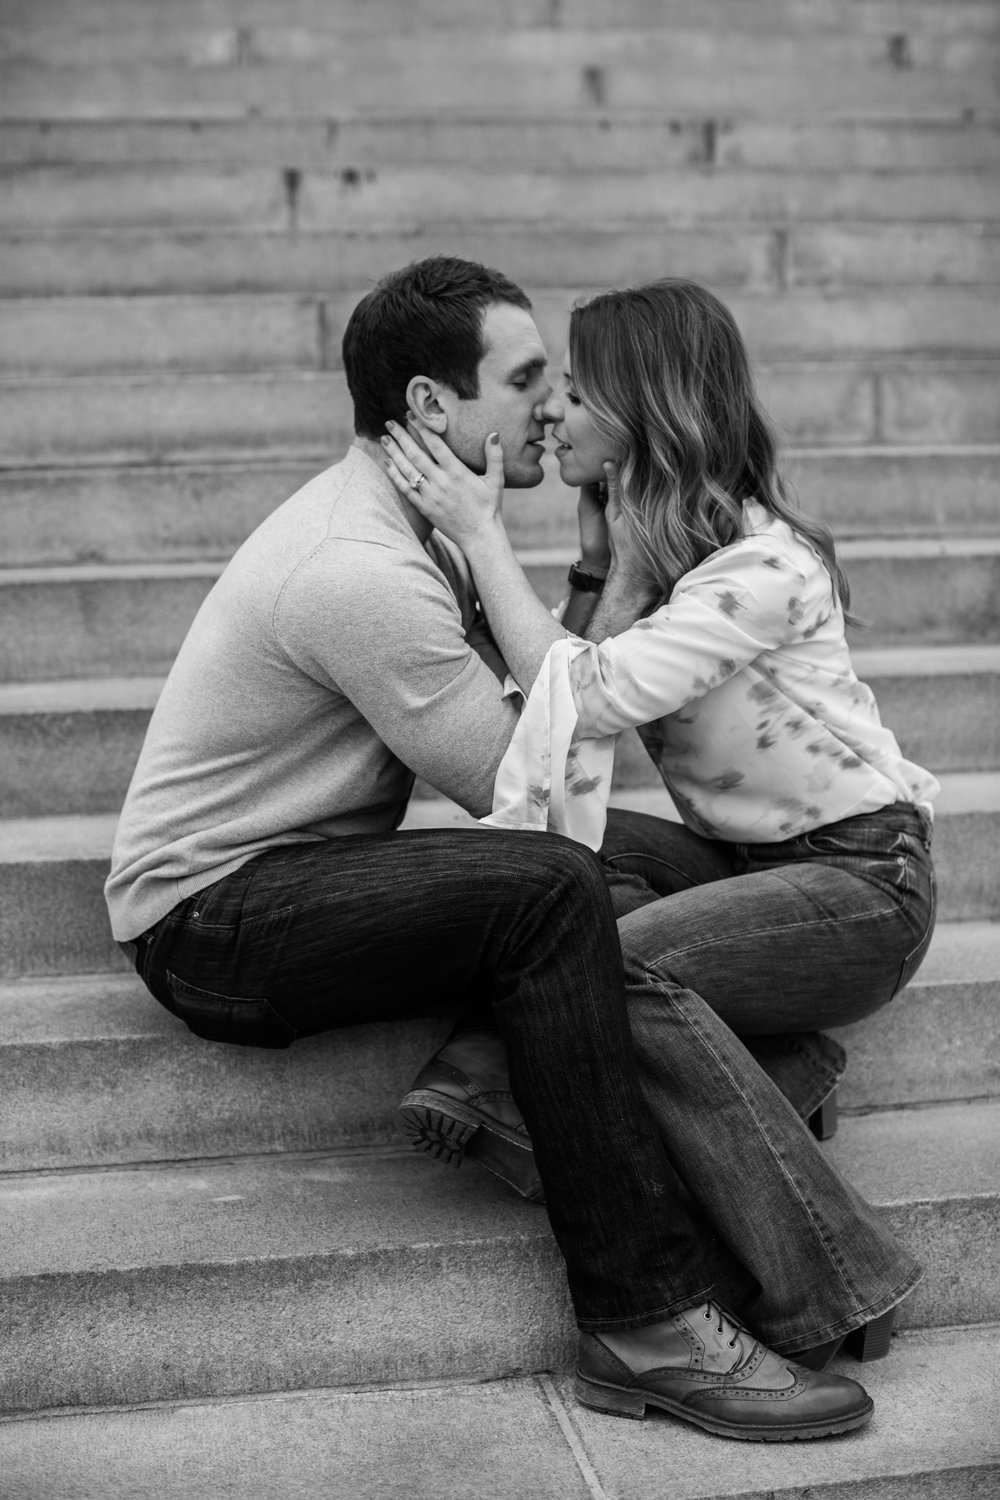 Kissing Photo in Black and White on Steps